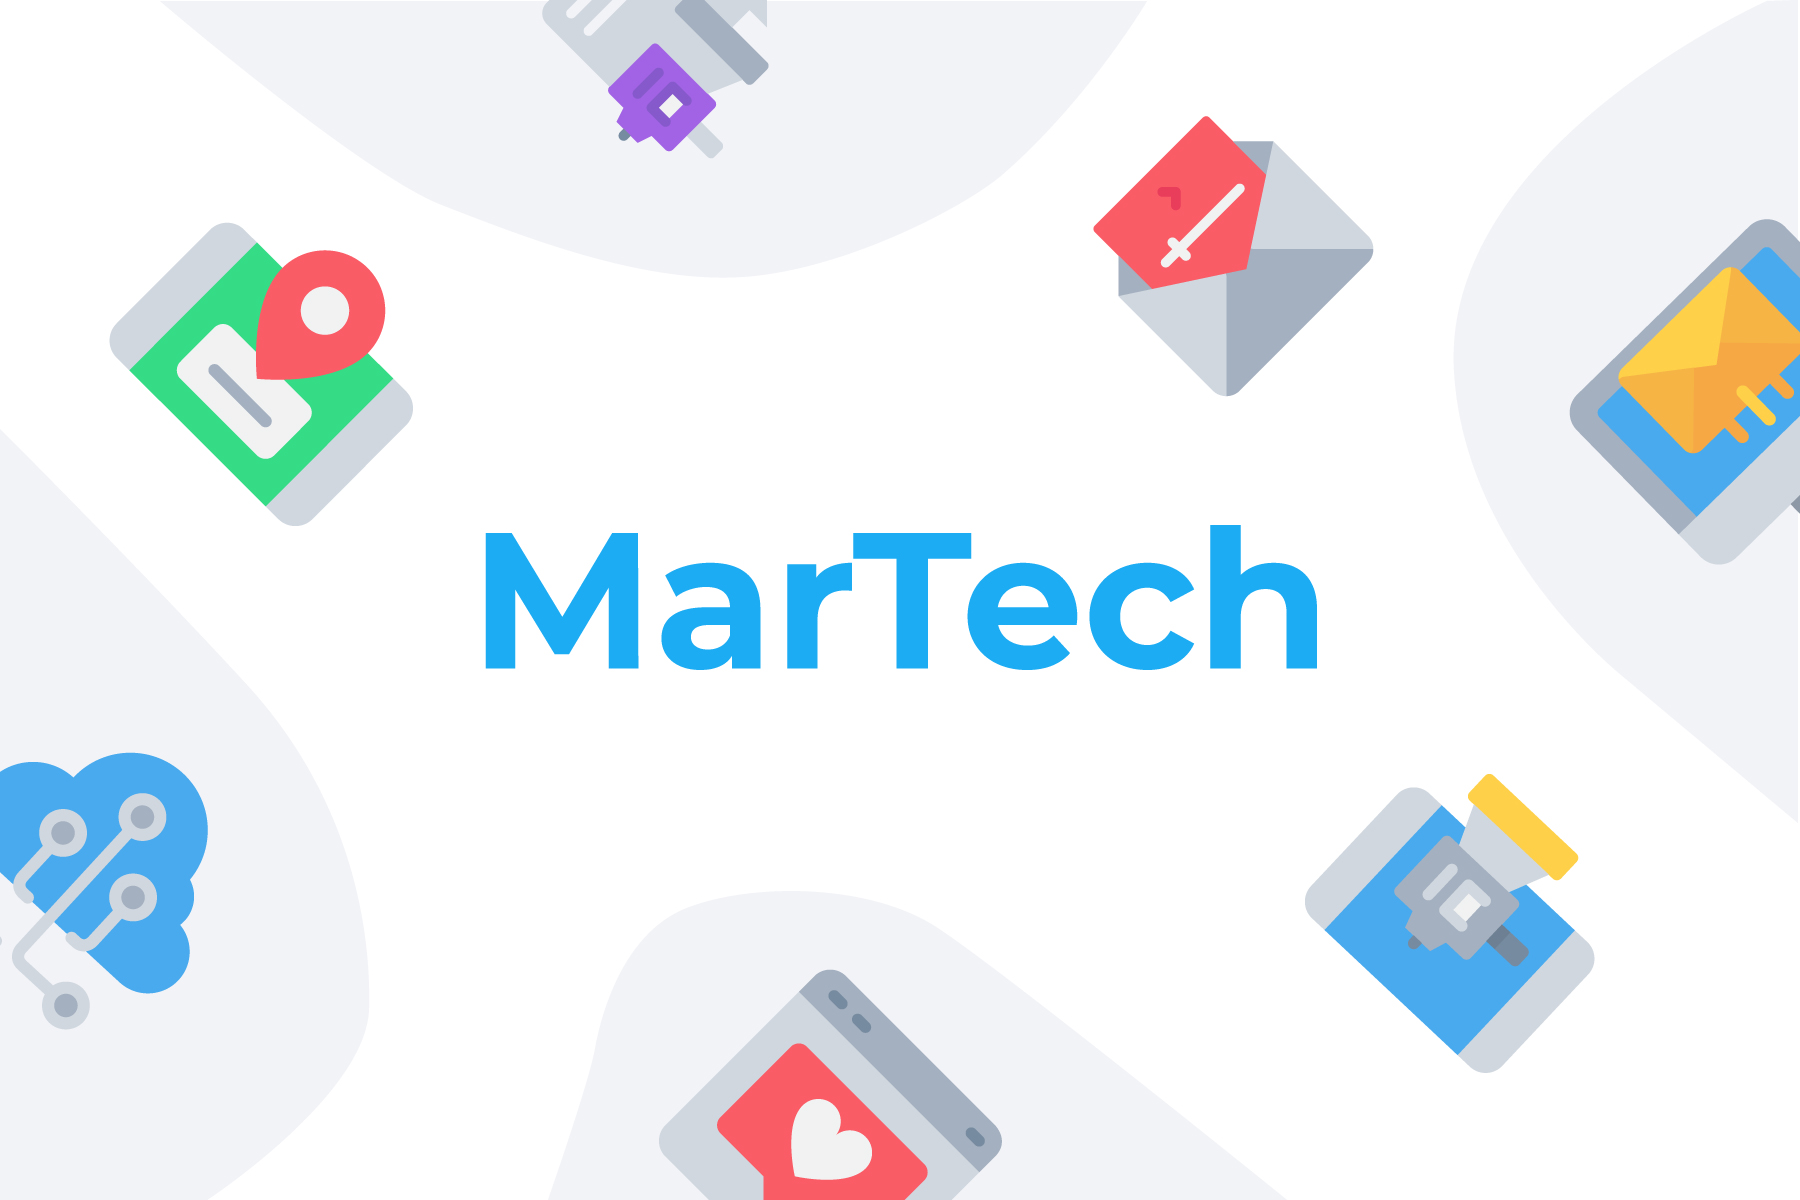 A Deep Look Into The Growth Of MarTech In Africa